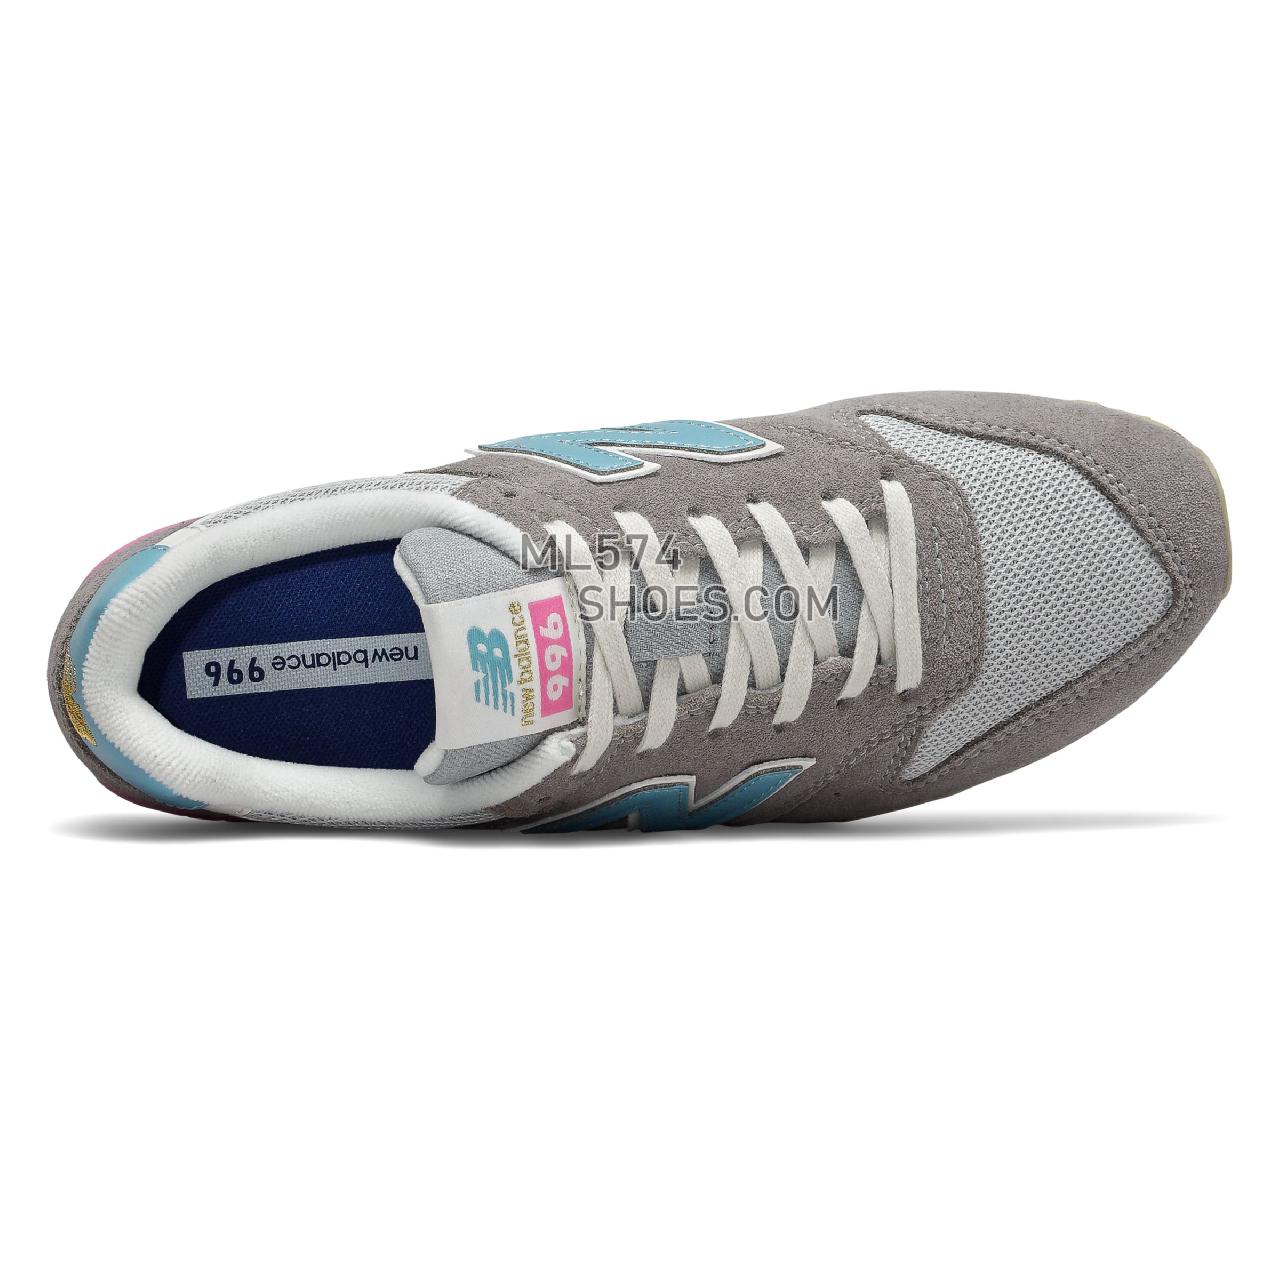 New Balance 996 - Women's 996 Classic - Marblehead with Wax Blue - WL996COL